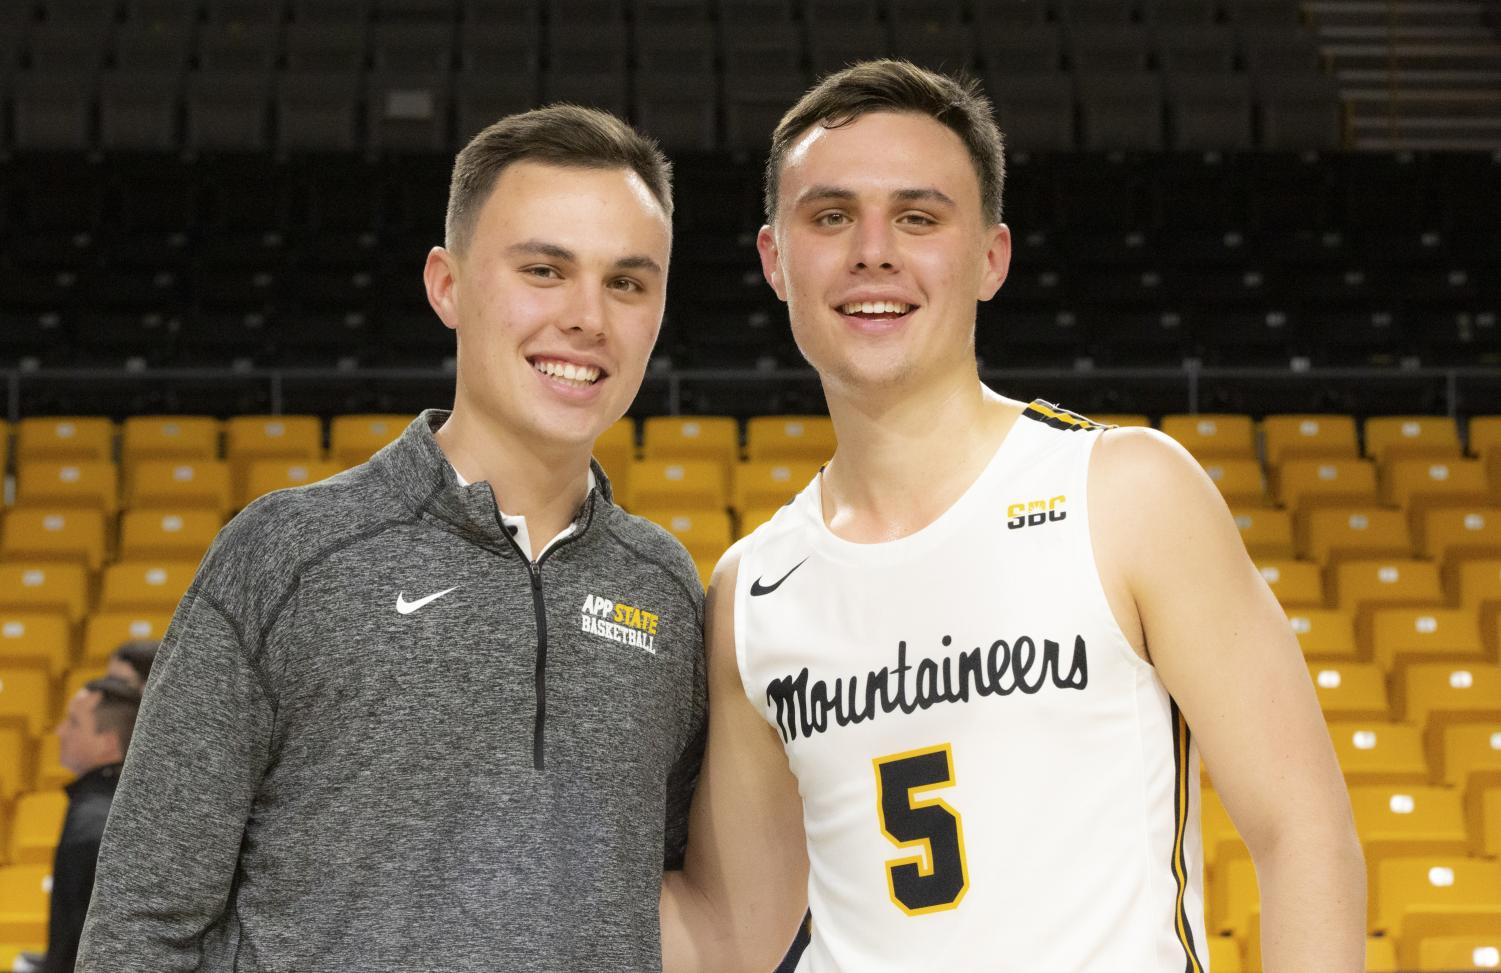 Twins dribble routes through Mountaineer basketball – The Appalachian